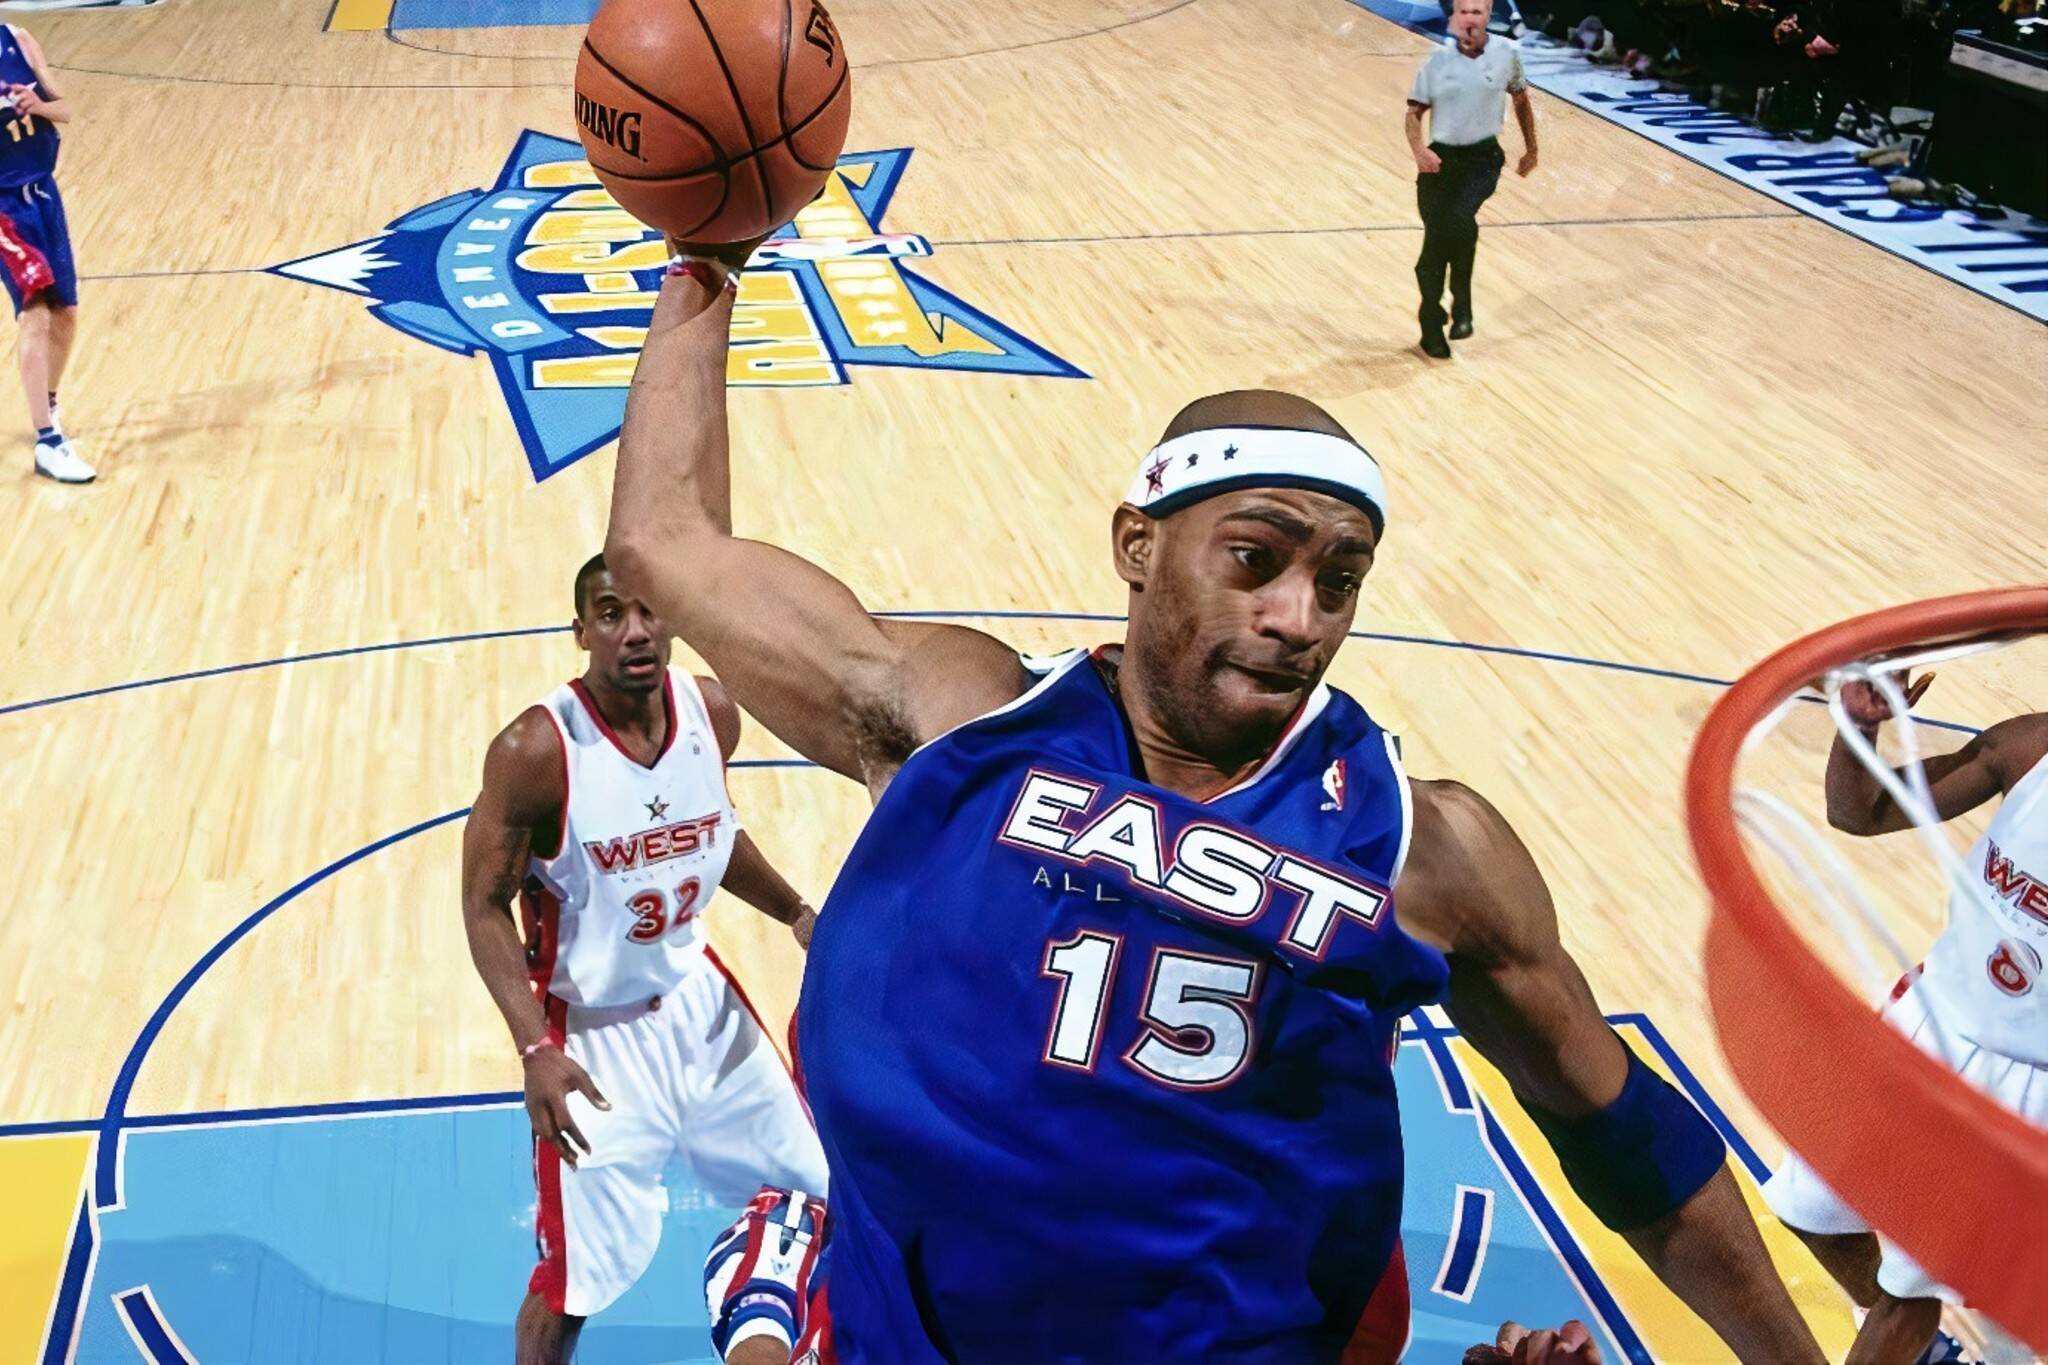 Vinsanity returns: A look at some of Vince Carter's highlights in